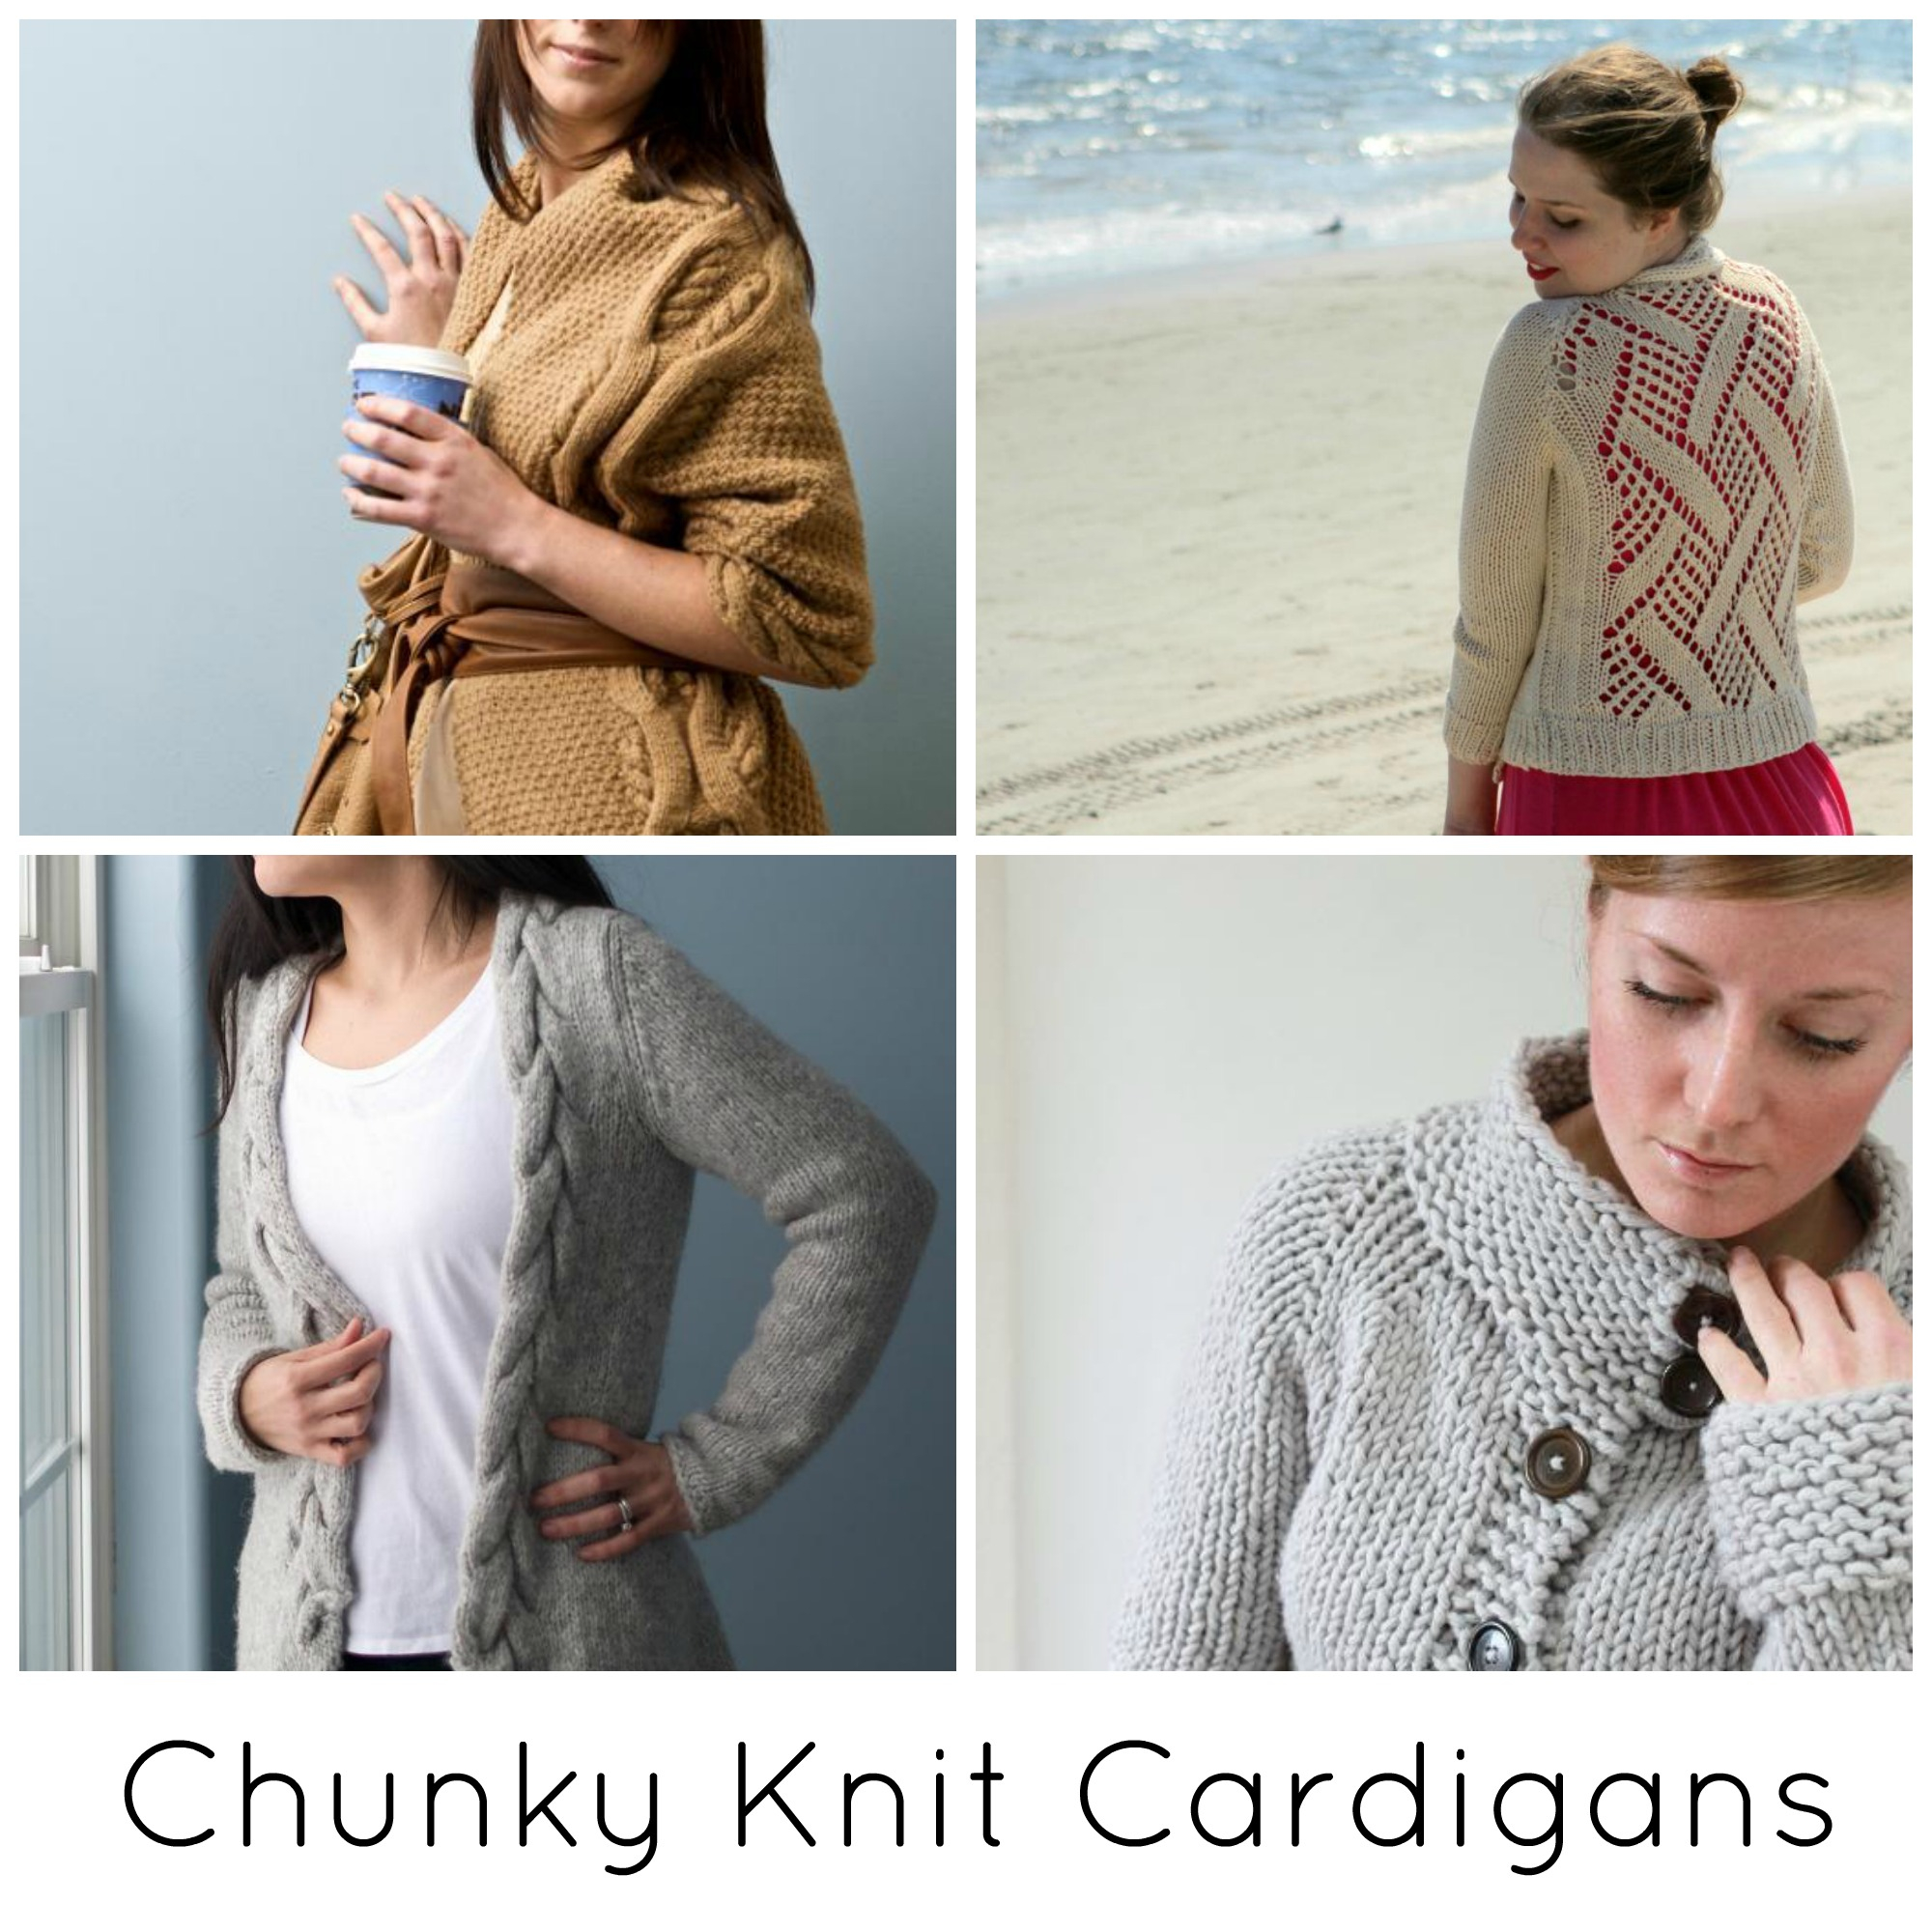 Knitted Jacket Patterns The Coziest Chunky Knit Cardigan Patterns Ever